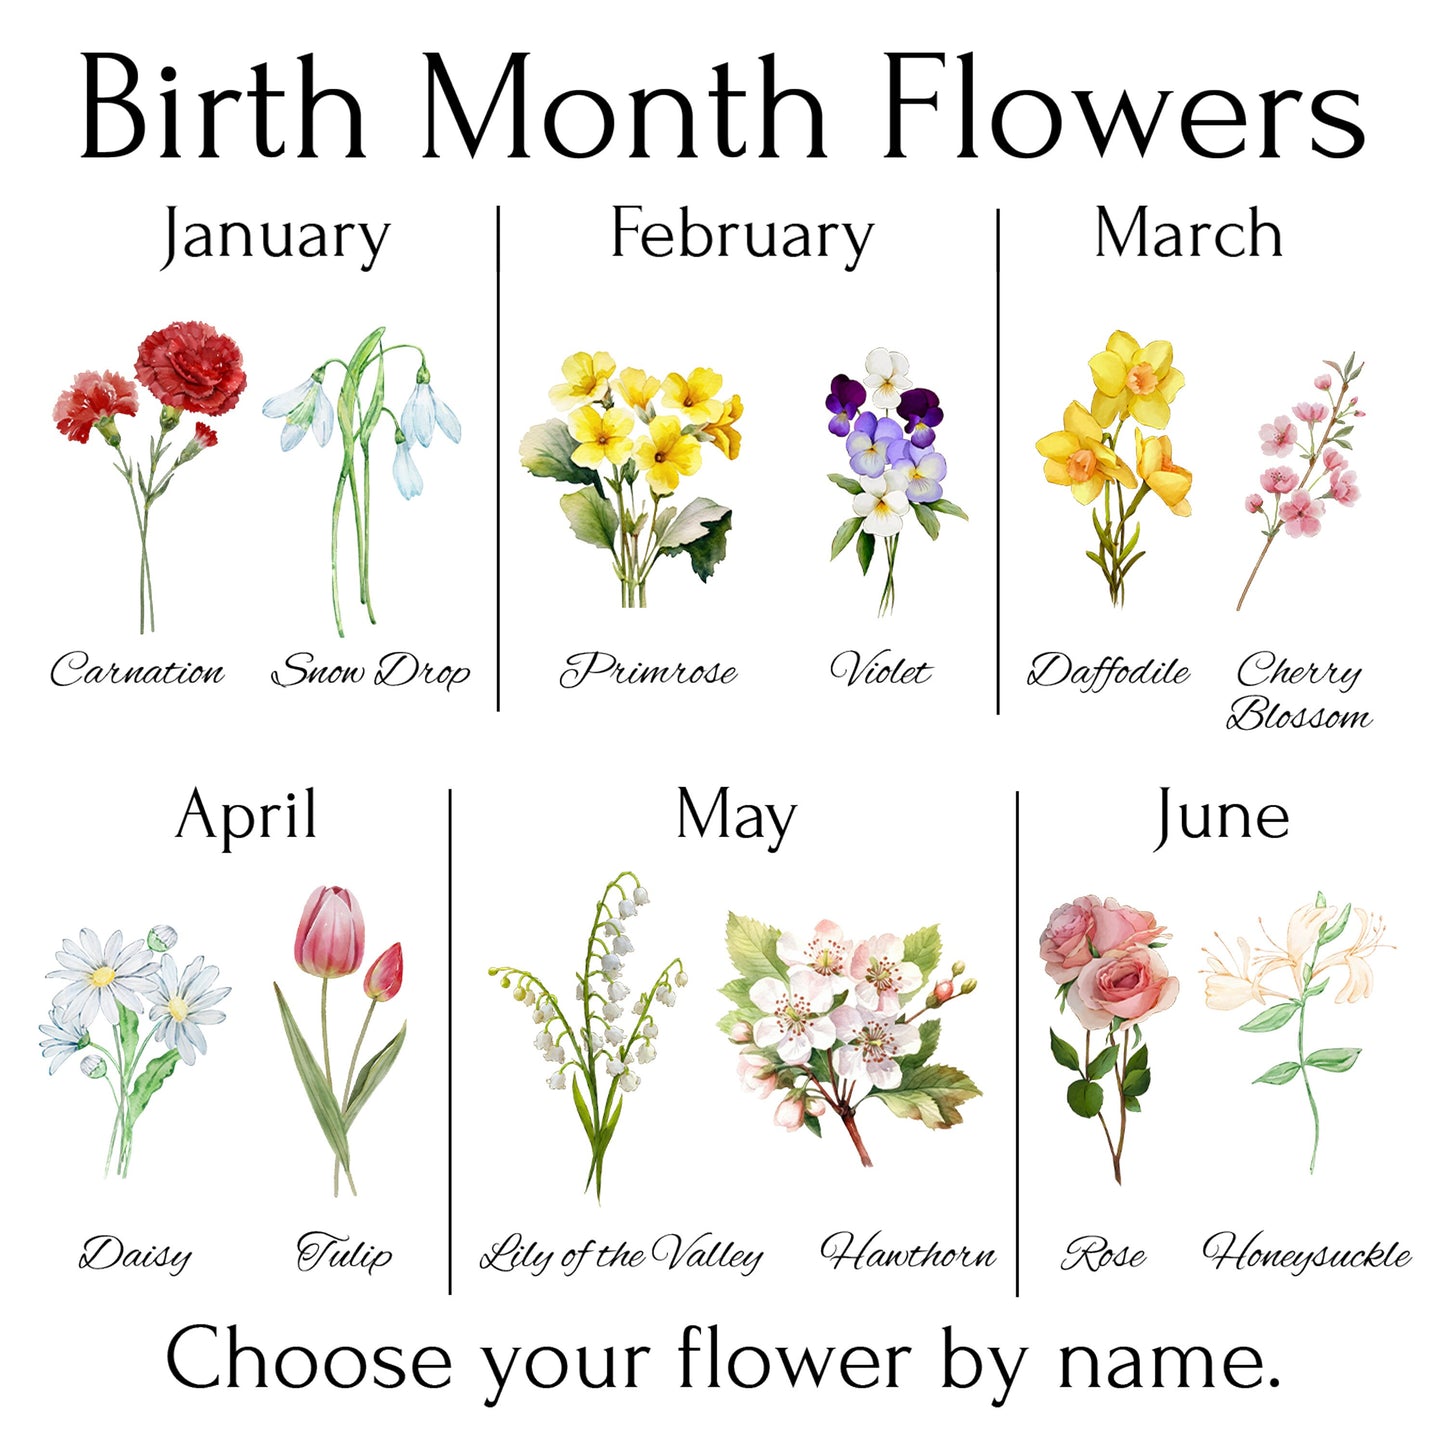 Gift for Mom or Grandma Personalized Garden Pillow Birth Month Flower Art Birth Flower Bouquet Personalized Gift Custom Mother's Day Gift